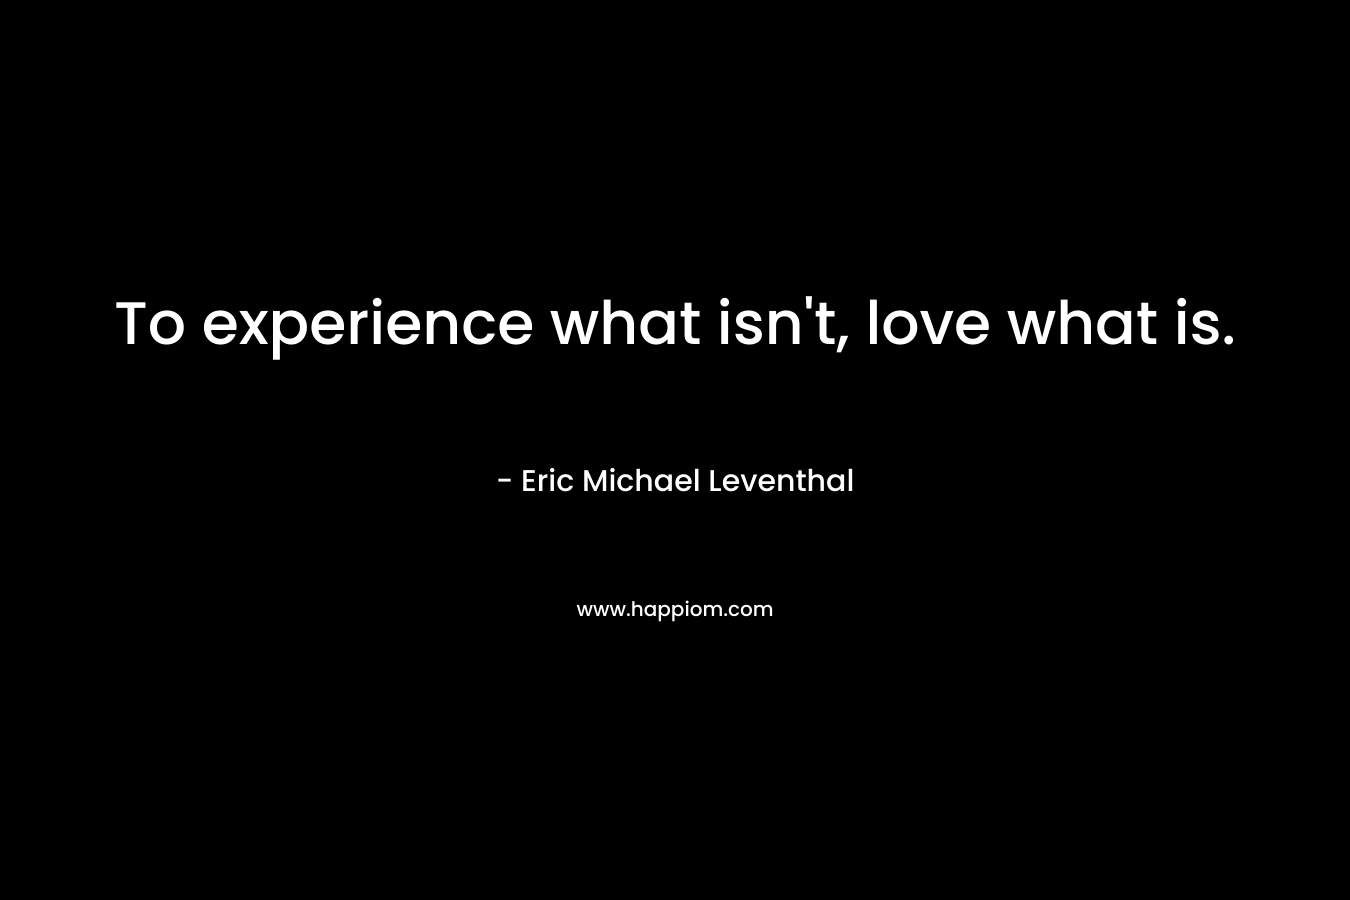 To experience what isn't, love what is.